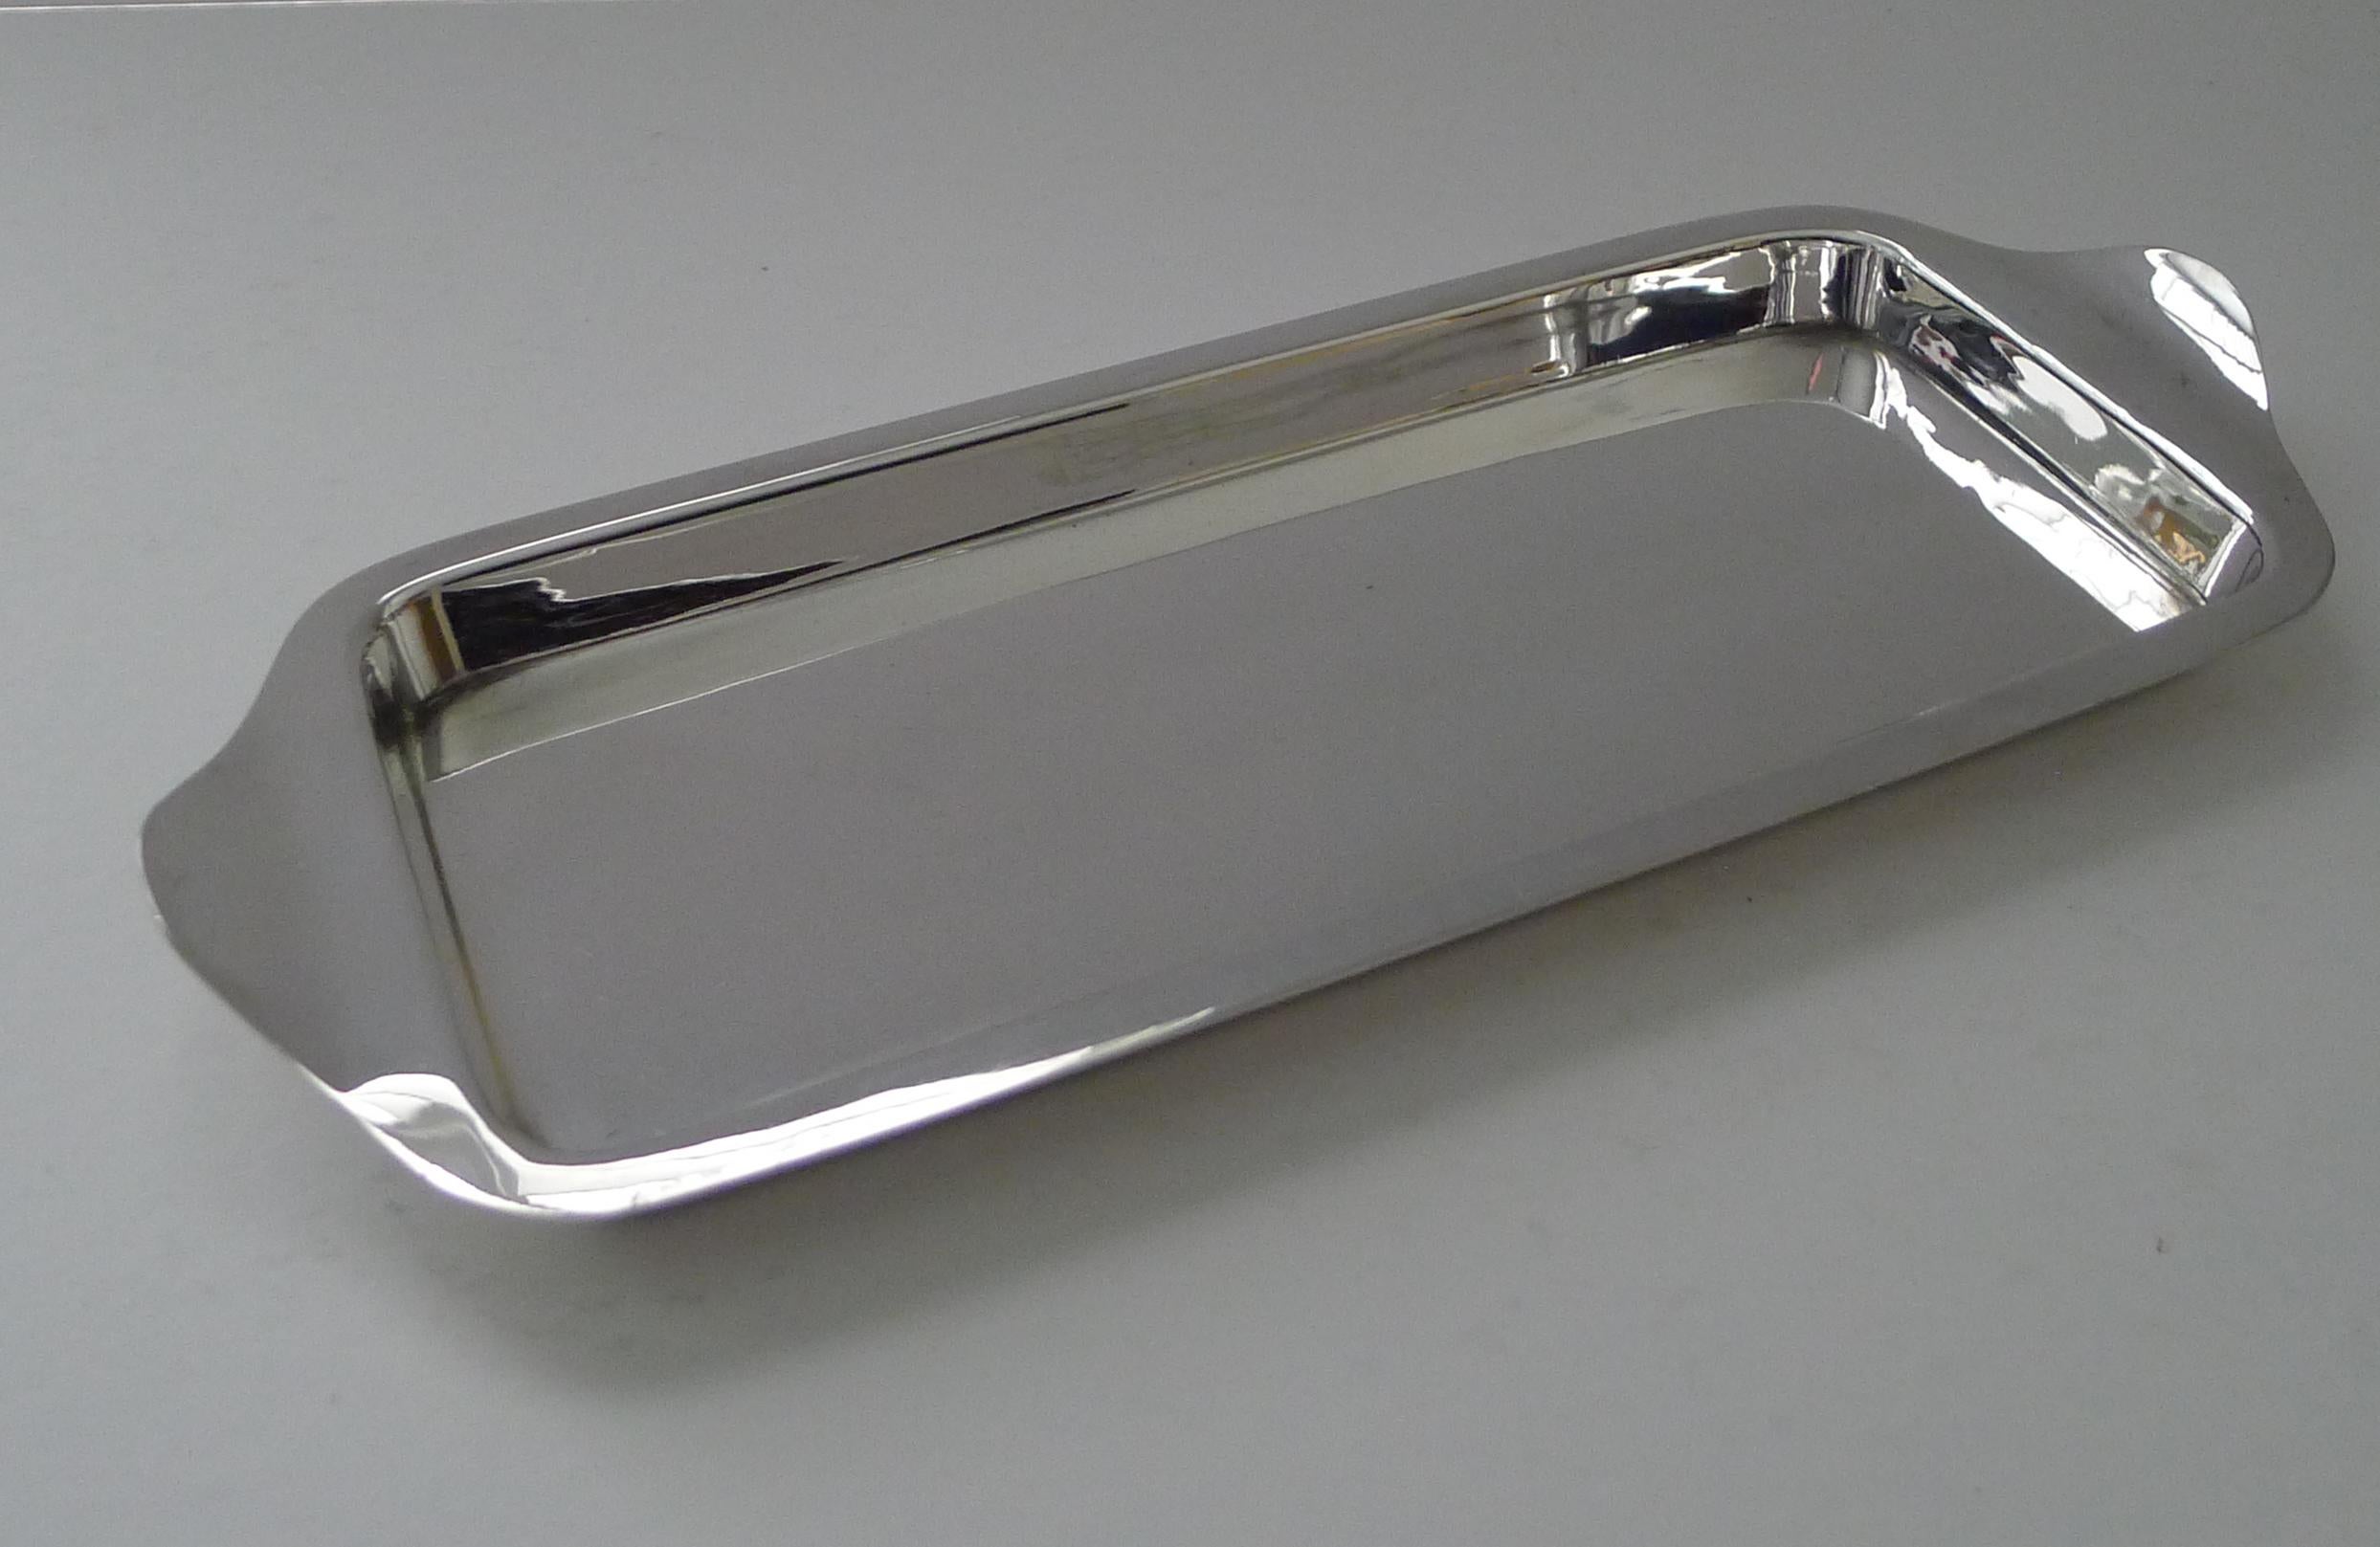 A handsome antique silver plated rectangular serving tray, perfect for a couple of glasses or to serve cocktail hors d'oeuvres or even finger sandwiches for afternoon tea.

Just back from our silversmith's workshop where it has been professionally